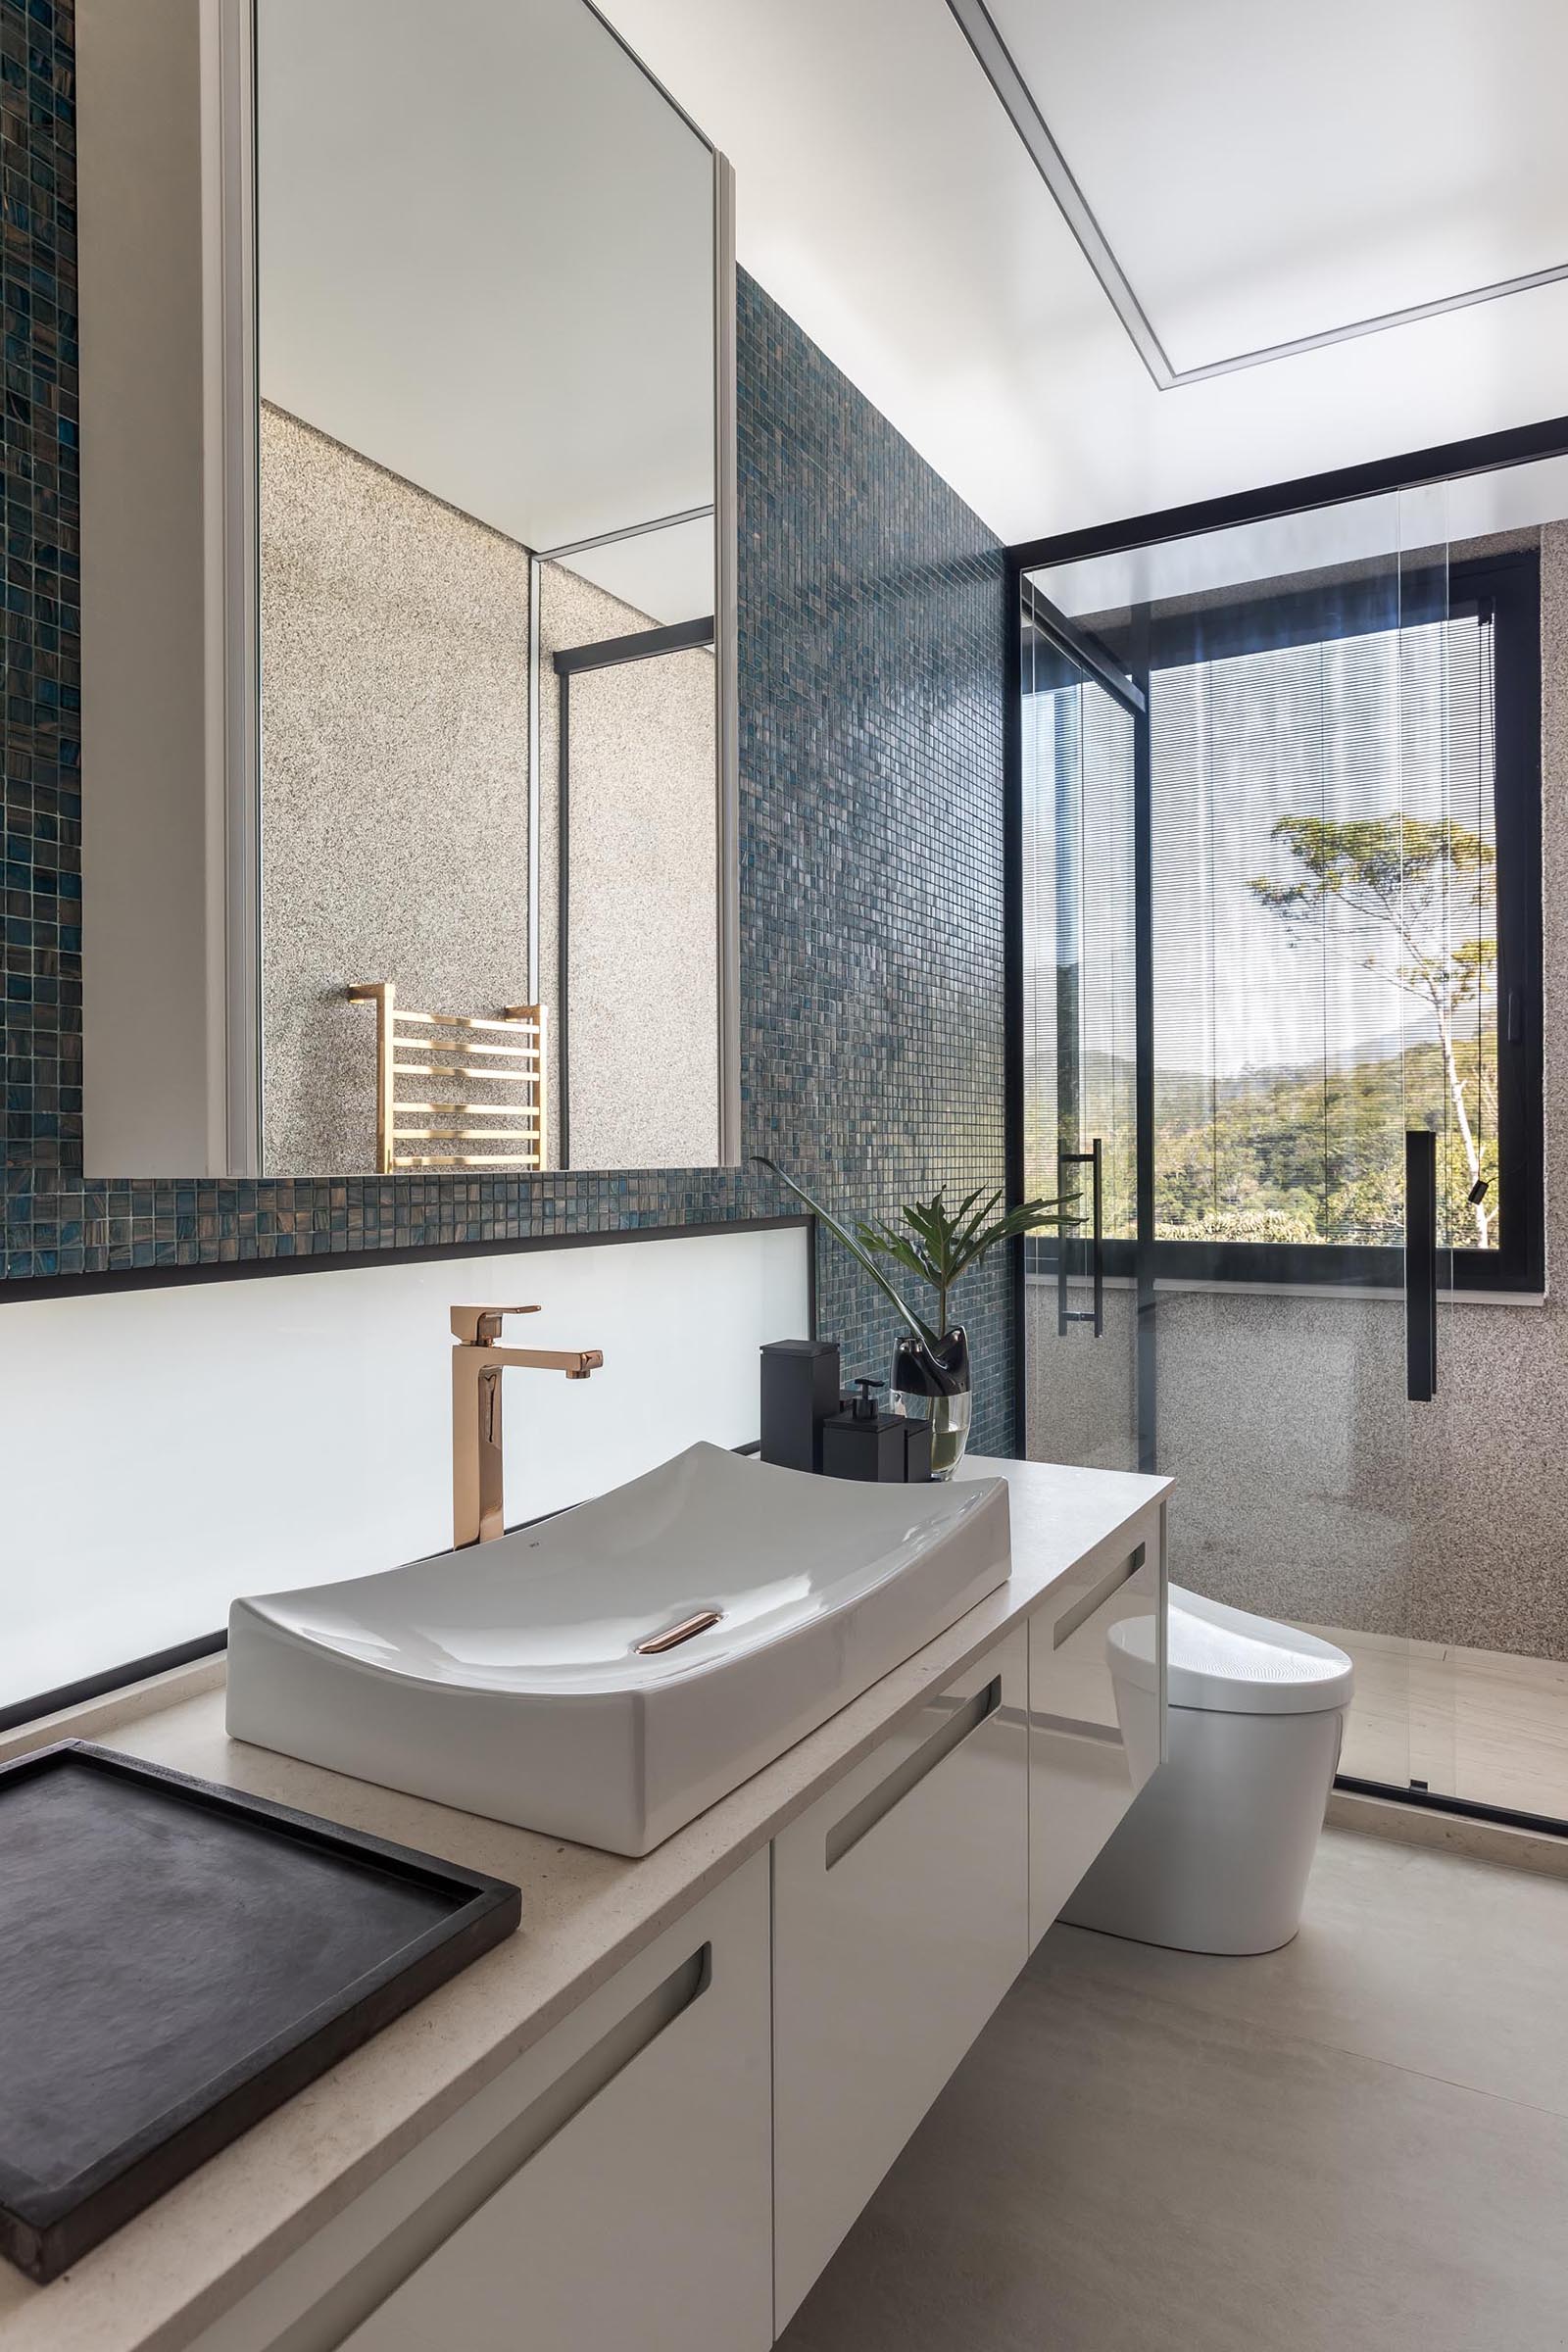 A blue tiled accent wall provides a backdrop for the white vanity and mirror in this modern bathroom.